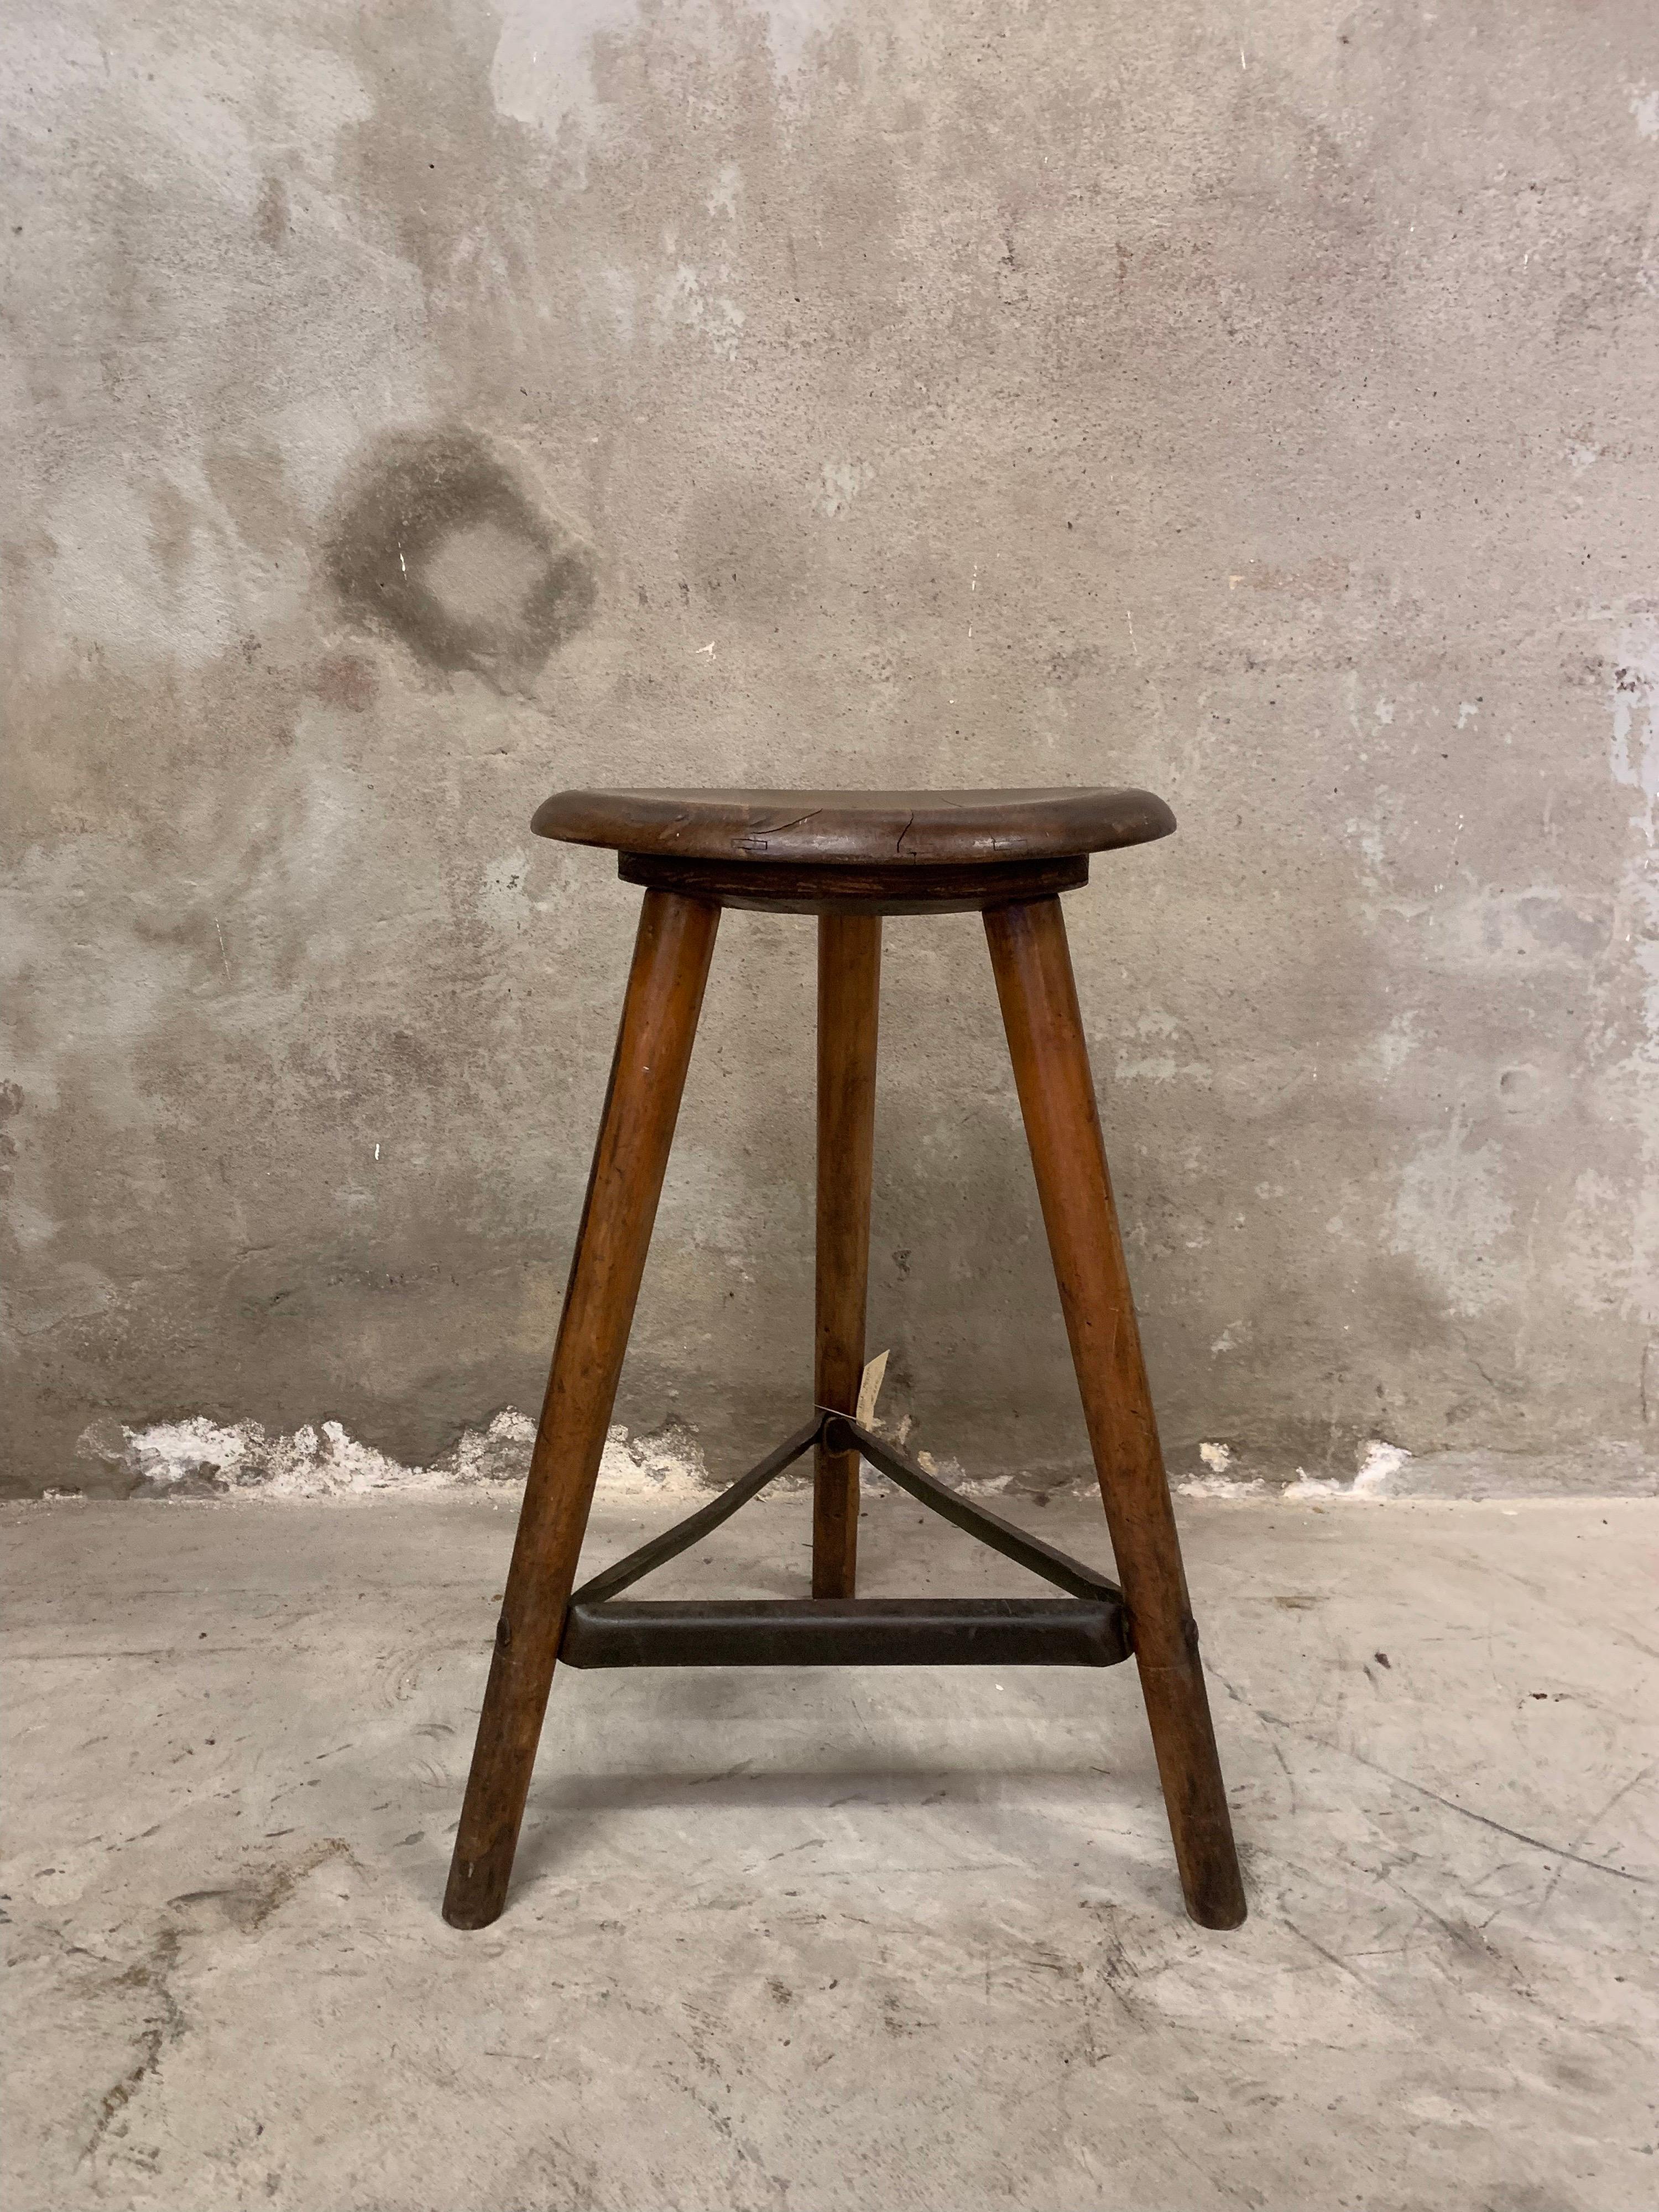 1920's Ama Wooden Industrial Stool 1